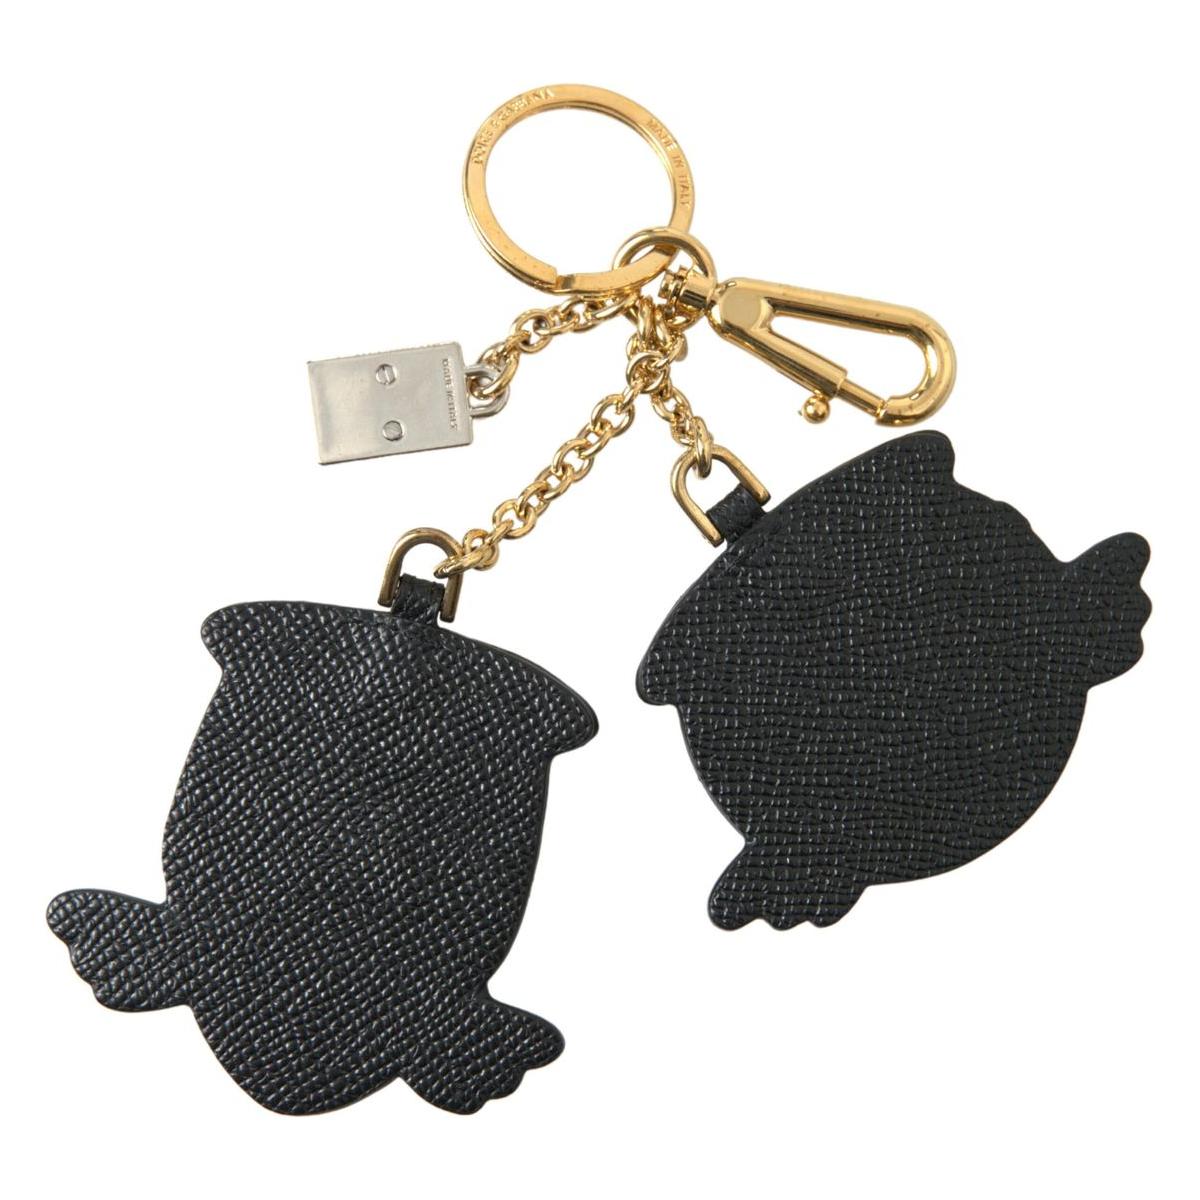 Dolce & Gabbana Chic Blue Leather Keychain with Gold Accents blue-angel-leather-dominico-stefano-keyring-keychain